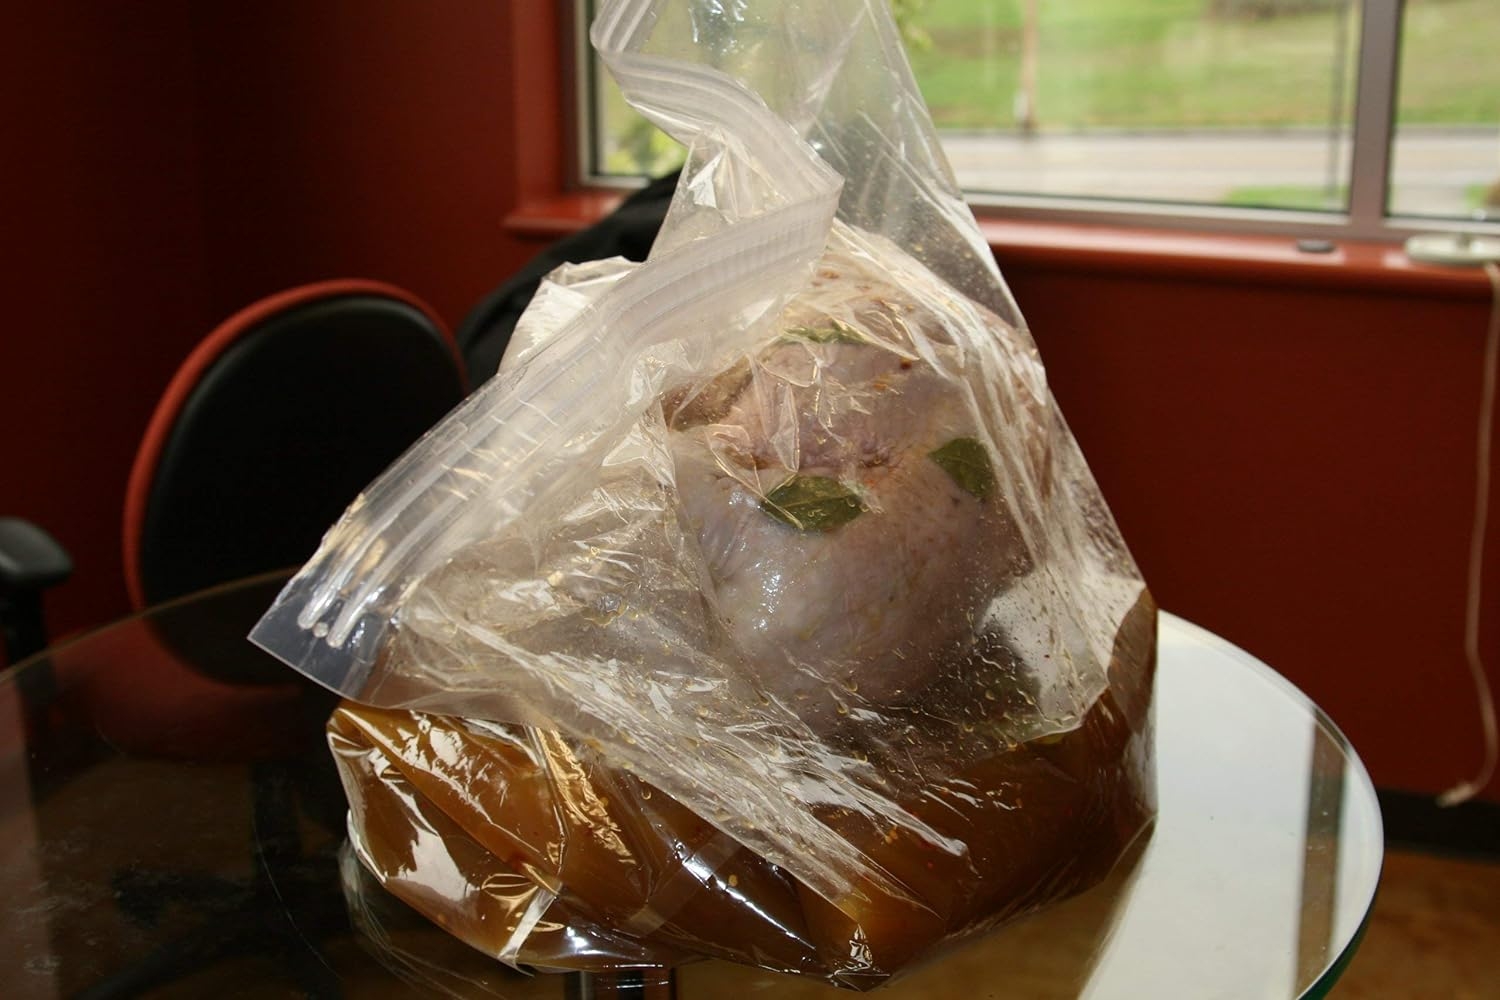 New and Improved Liquid Solution Turkey Brining Bags - No BPA - Heavier Duty Materials - Thicker Seams - Gusseted Bottom - Double Track Zippers - Extra Large - Set of 2, 21.5 x 25.5 in Each